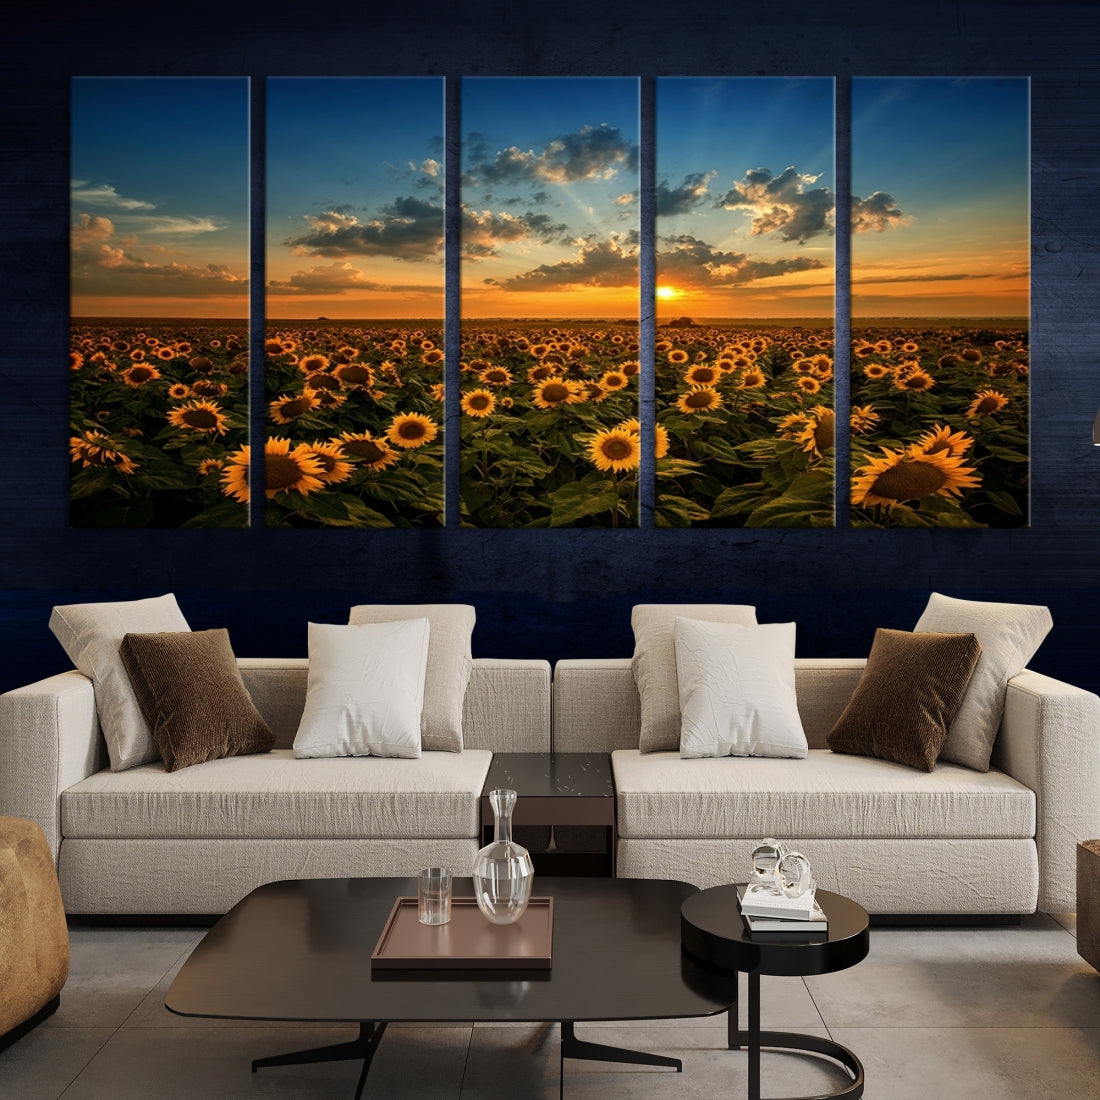 Sunflower Field Sunset Large Wall Art Canvas Print for Living Room Dining Room Home Office Wall Decor Artwork